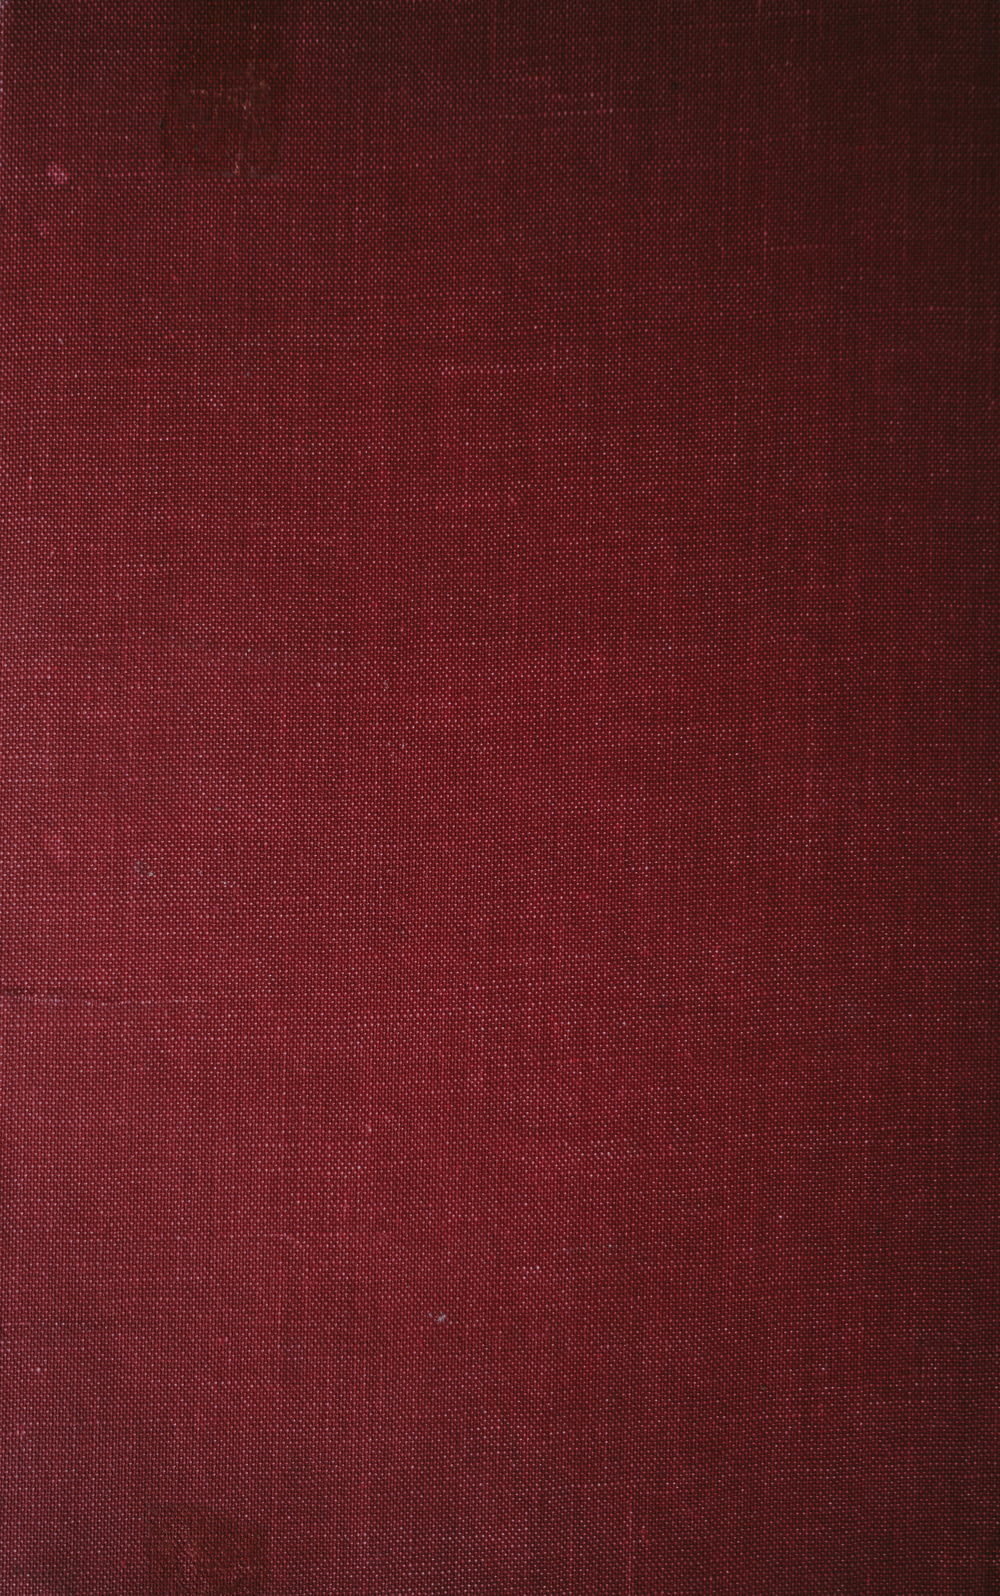 a close up of a red book cover